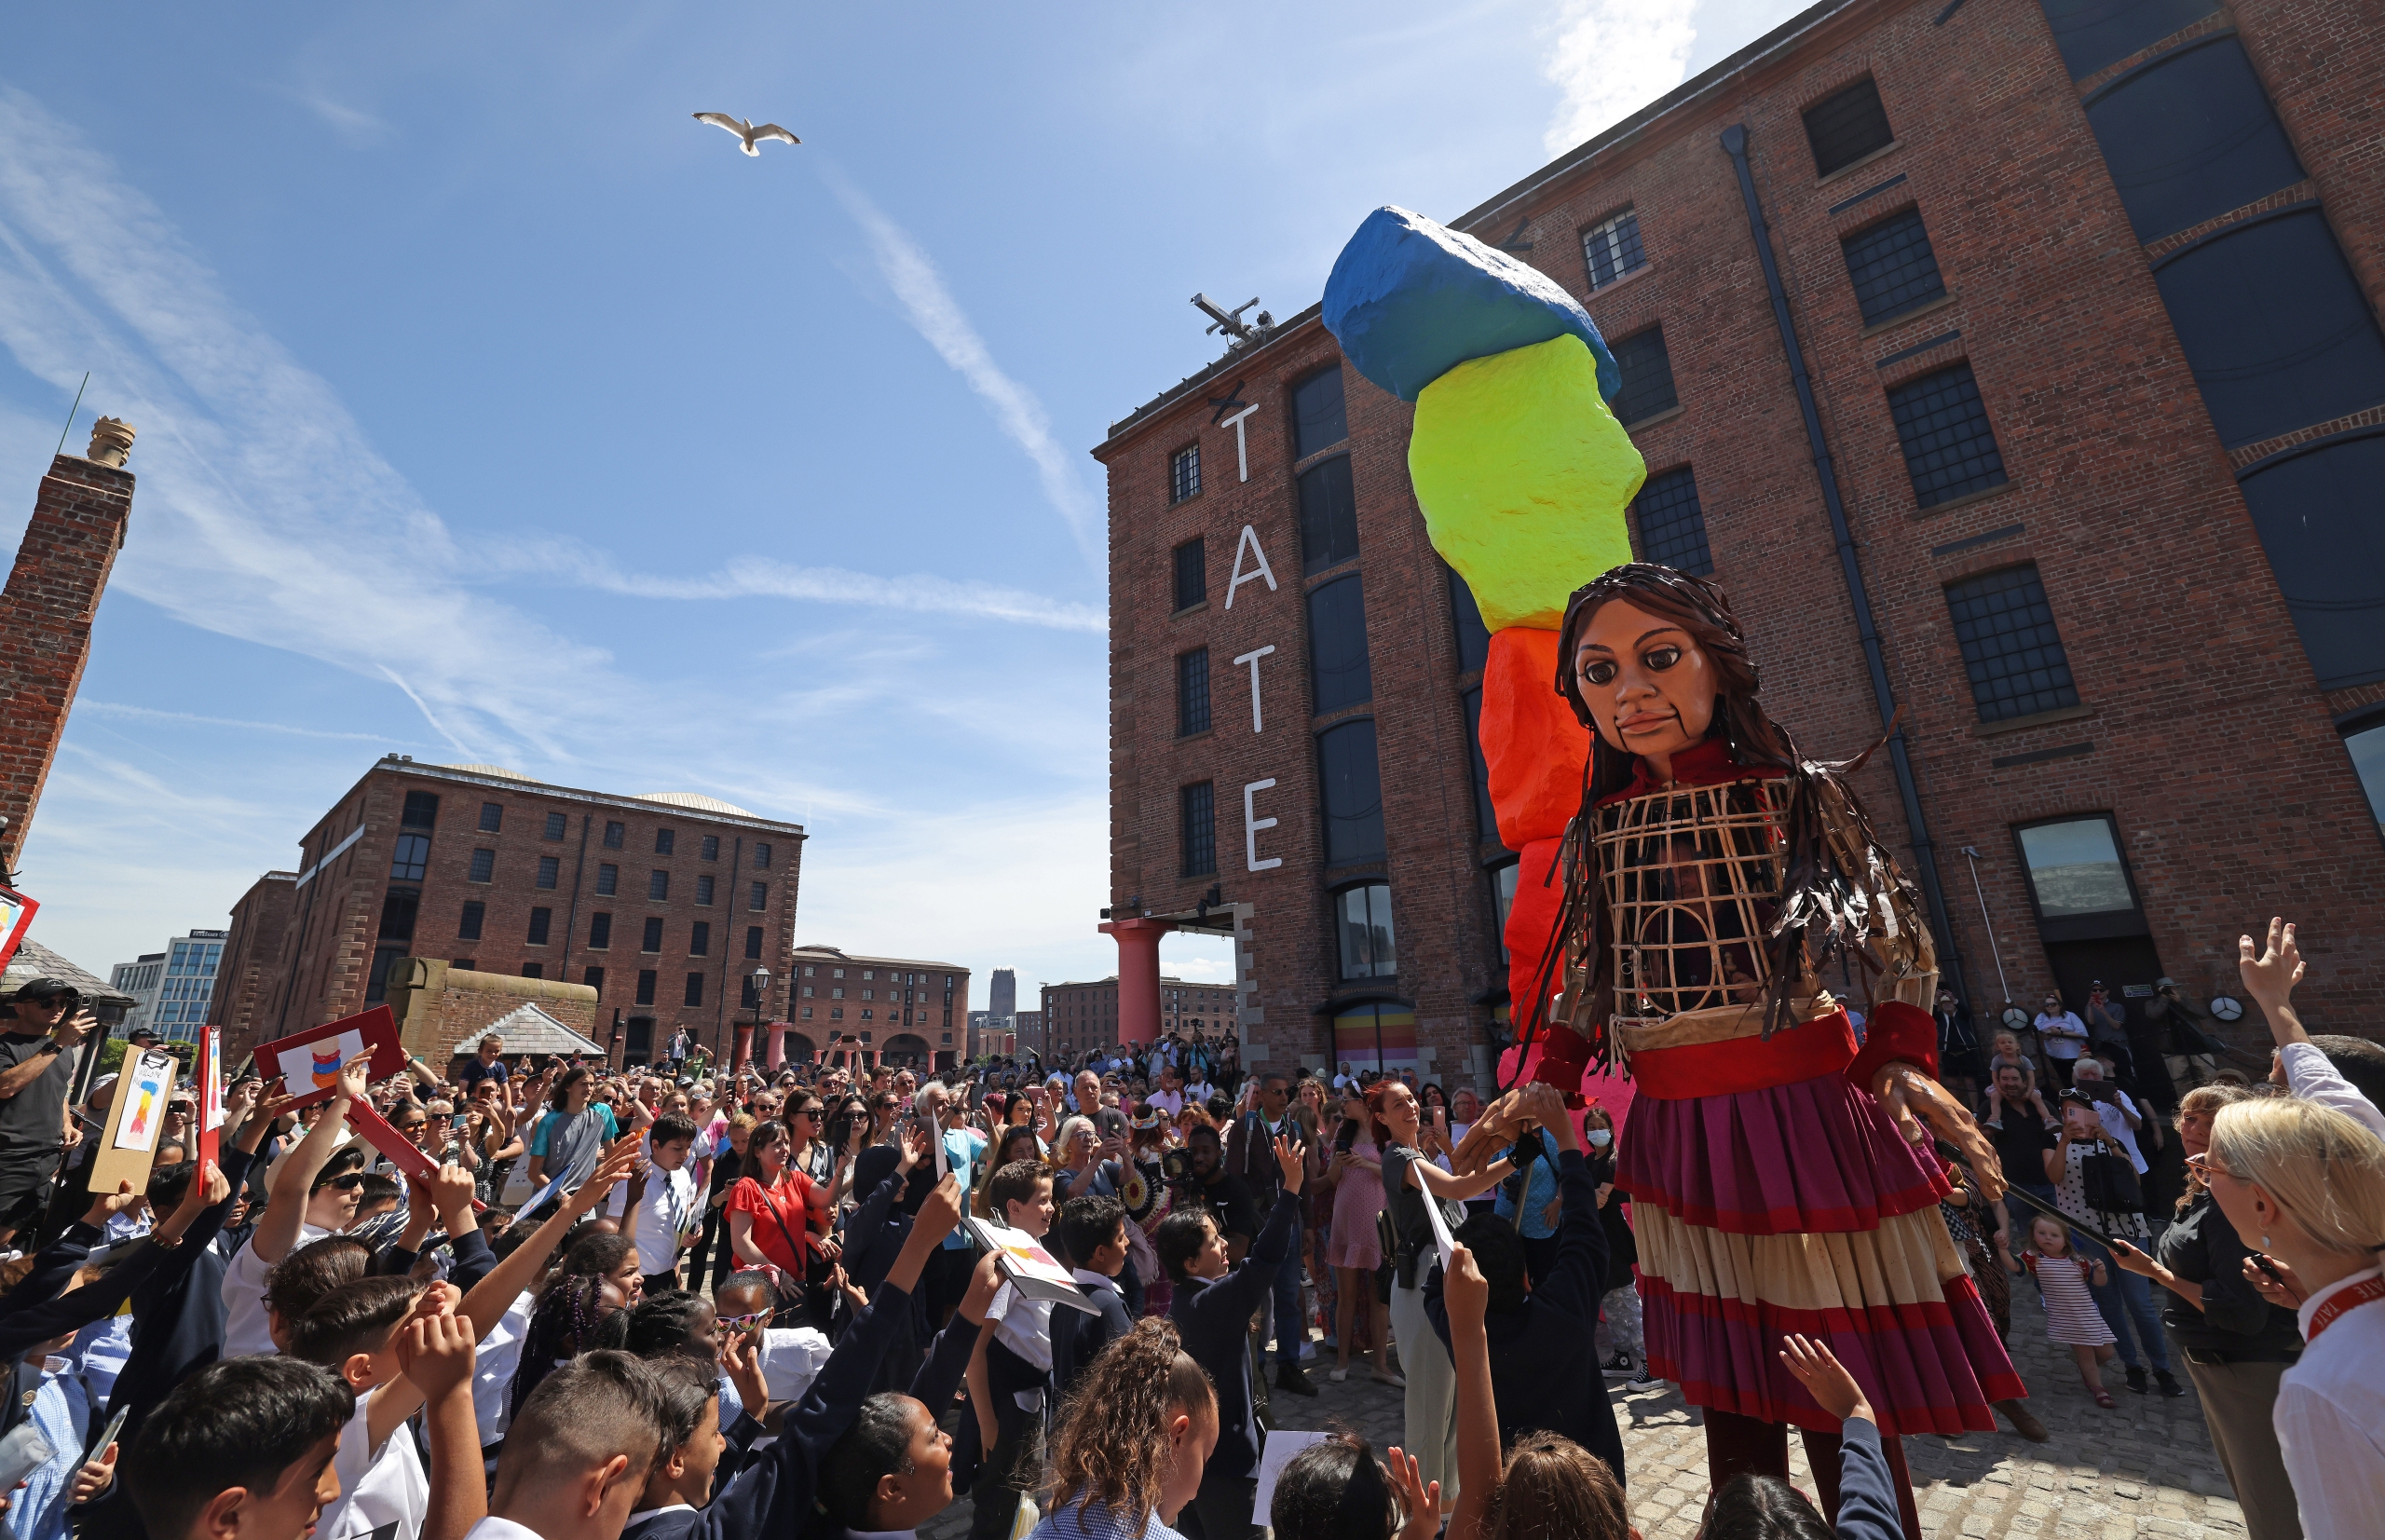 little amal a giant walking wooden puppet in front of tate liverpool in the albert dock surrounded by crowds